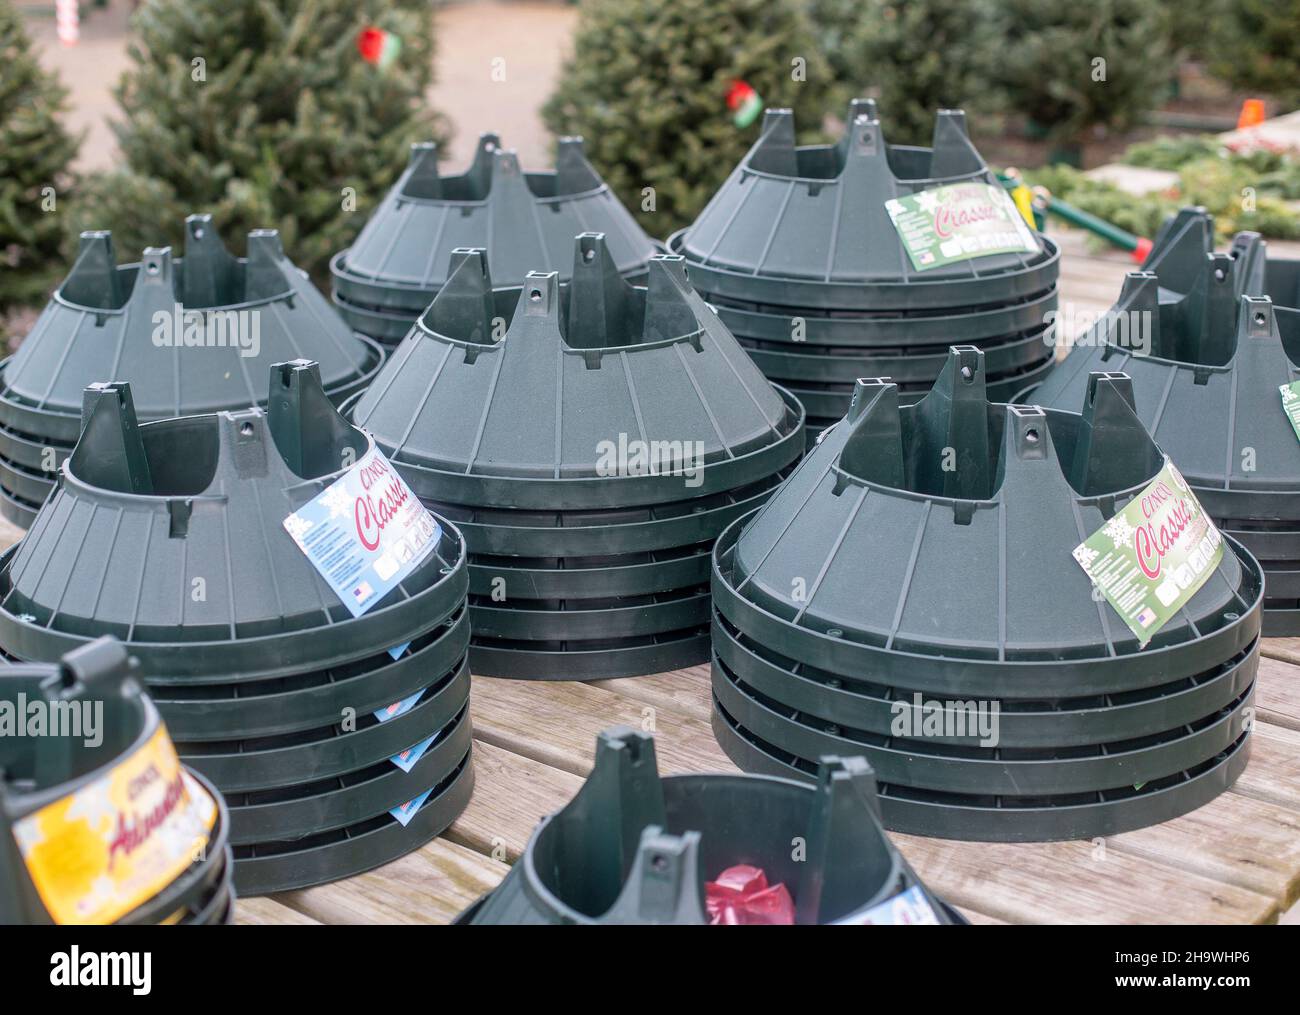 Christmas tree stands on sale at a nursery Stock Photo